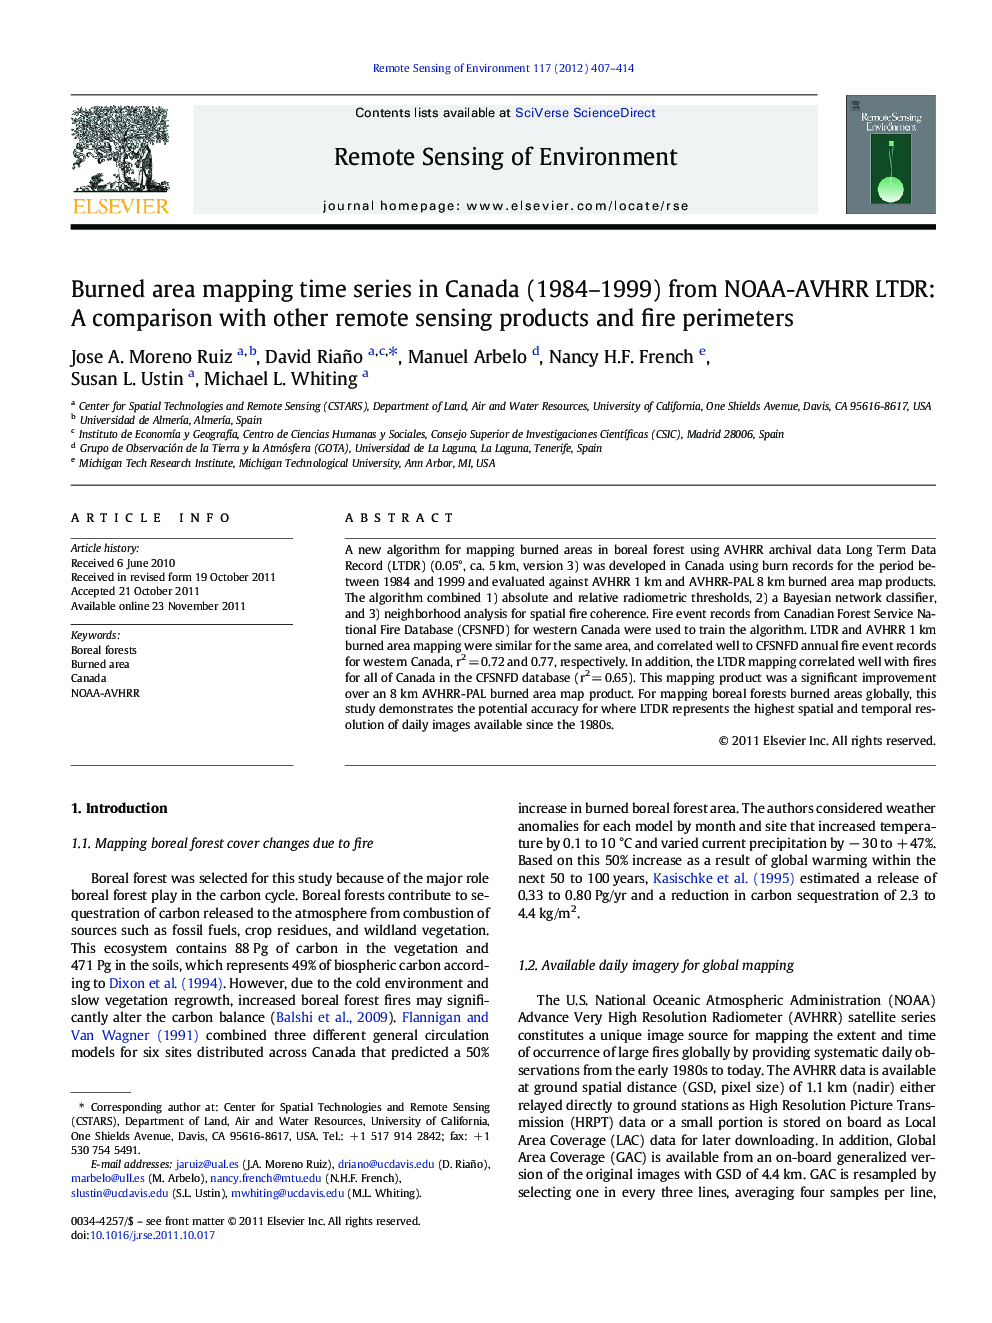 Burned area mapping time series in Canada (1984–1999) from NOAA-AVHRR LTDR: A comparison with other remote sensing products and fire perimeters